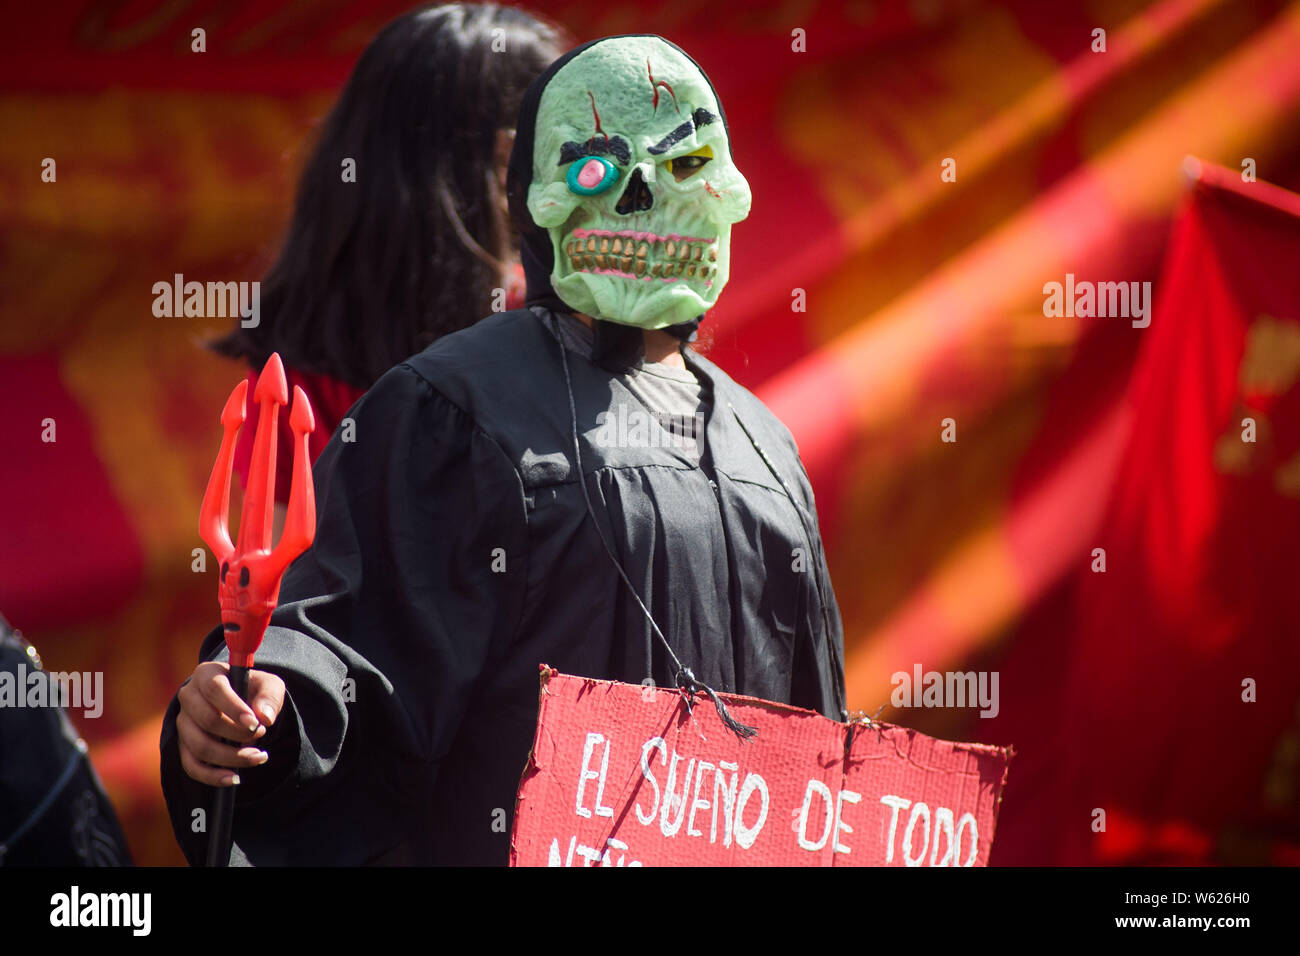 San Salvador, El Salvador. 30th July, 2019. University students march as part of the commemoration of a massacre lead by the Salvadoran Government in 1975 where more than a hundrer died according to the State University Credit: Camilo Freedman/ZUMA Wire/Alamy Live News Stock Photo